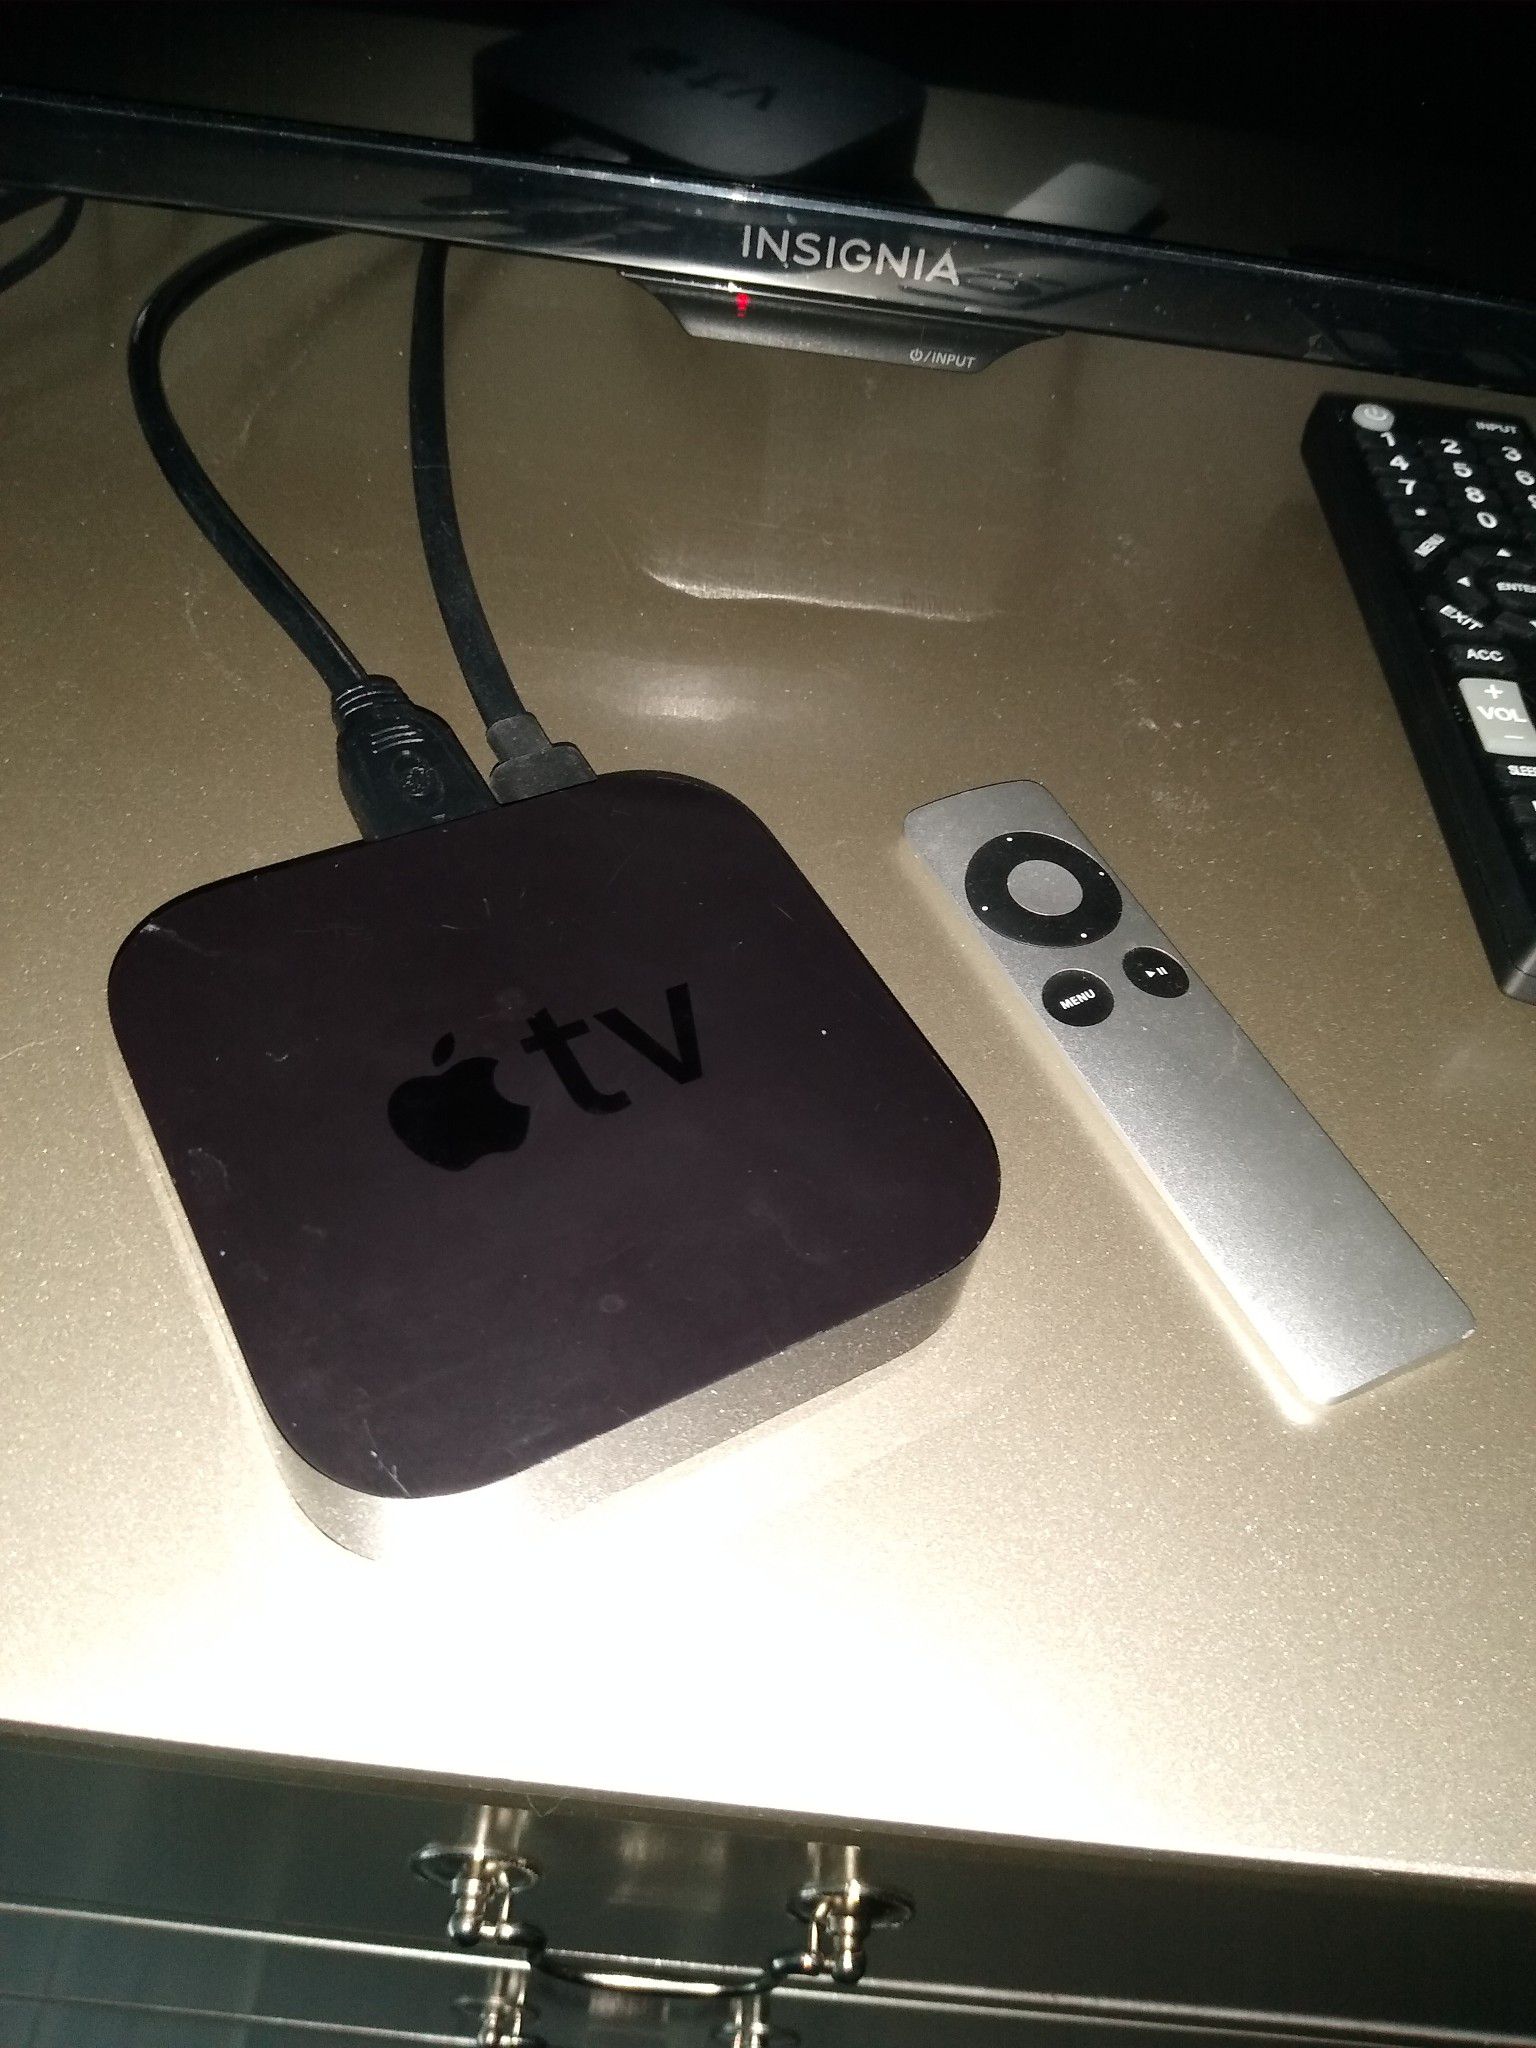 Apple TV 3rd generation, works like new, comes with cords and remote- adult owned